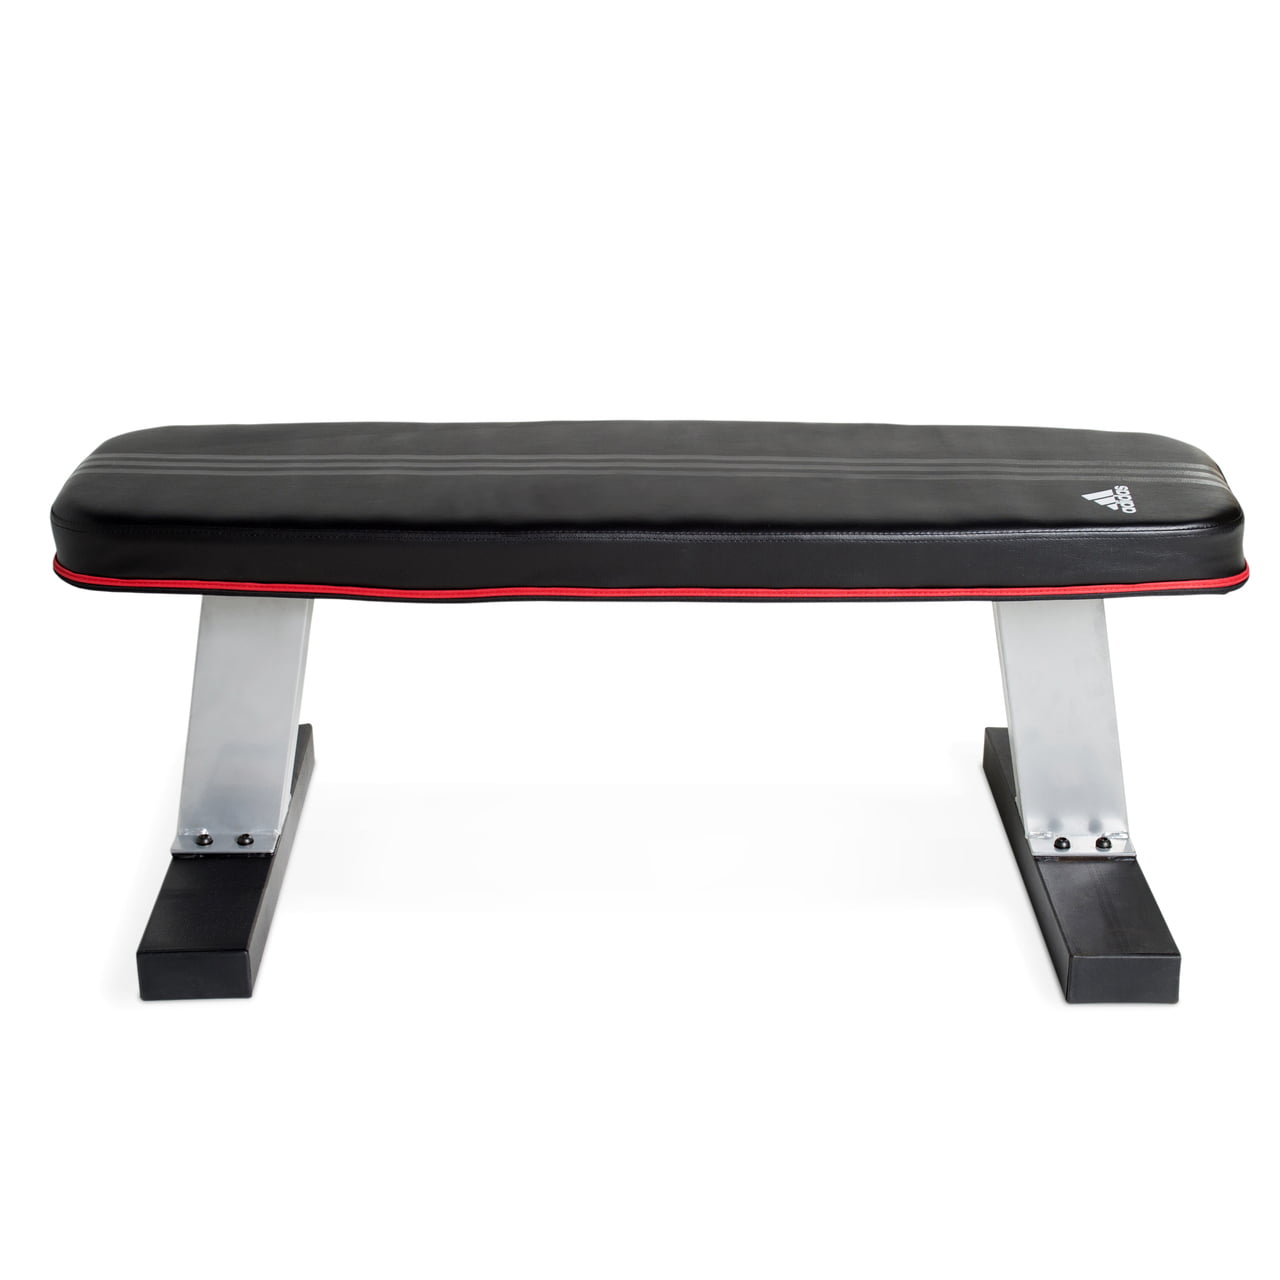 Adidas Performance Steel Tube Home Low Profile Flat Bench, Silver/Black -